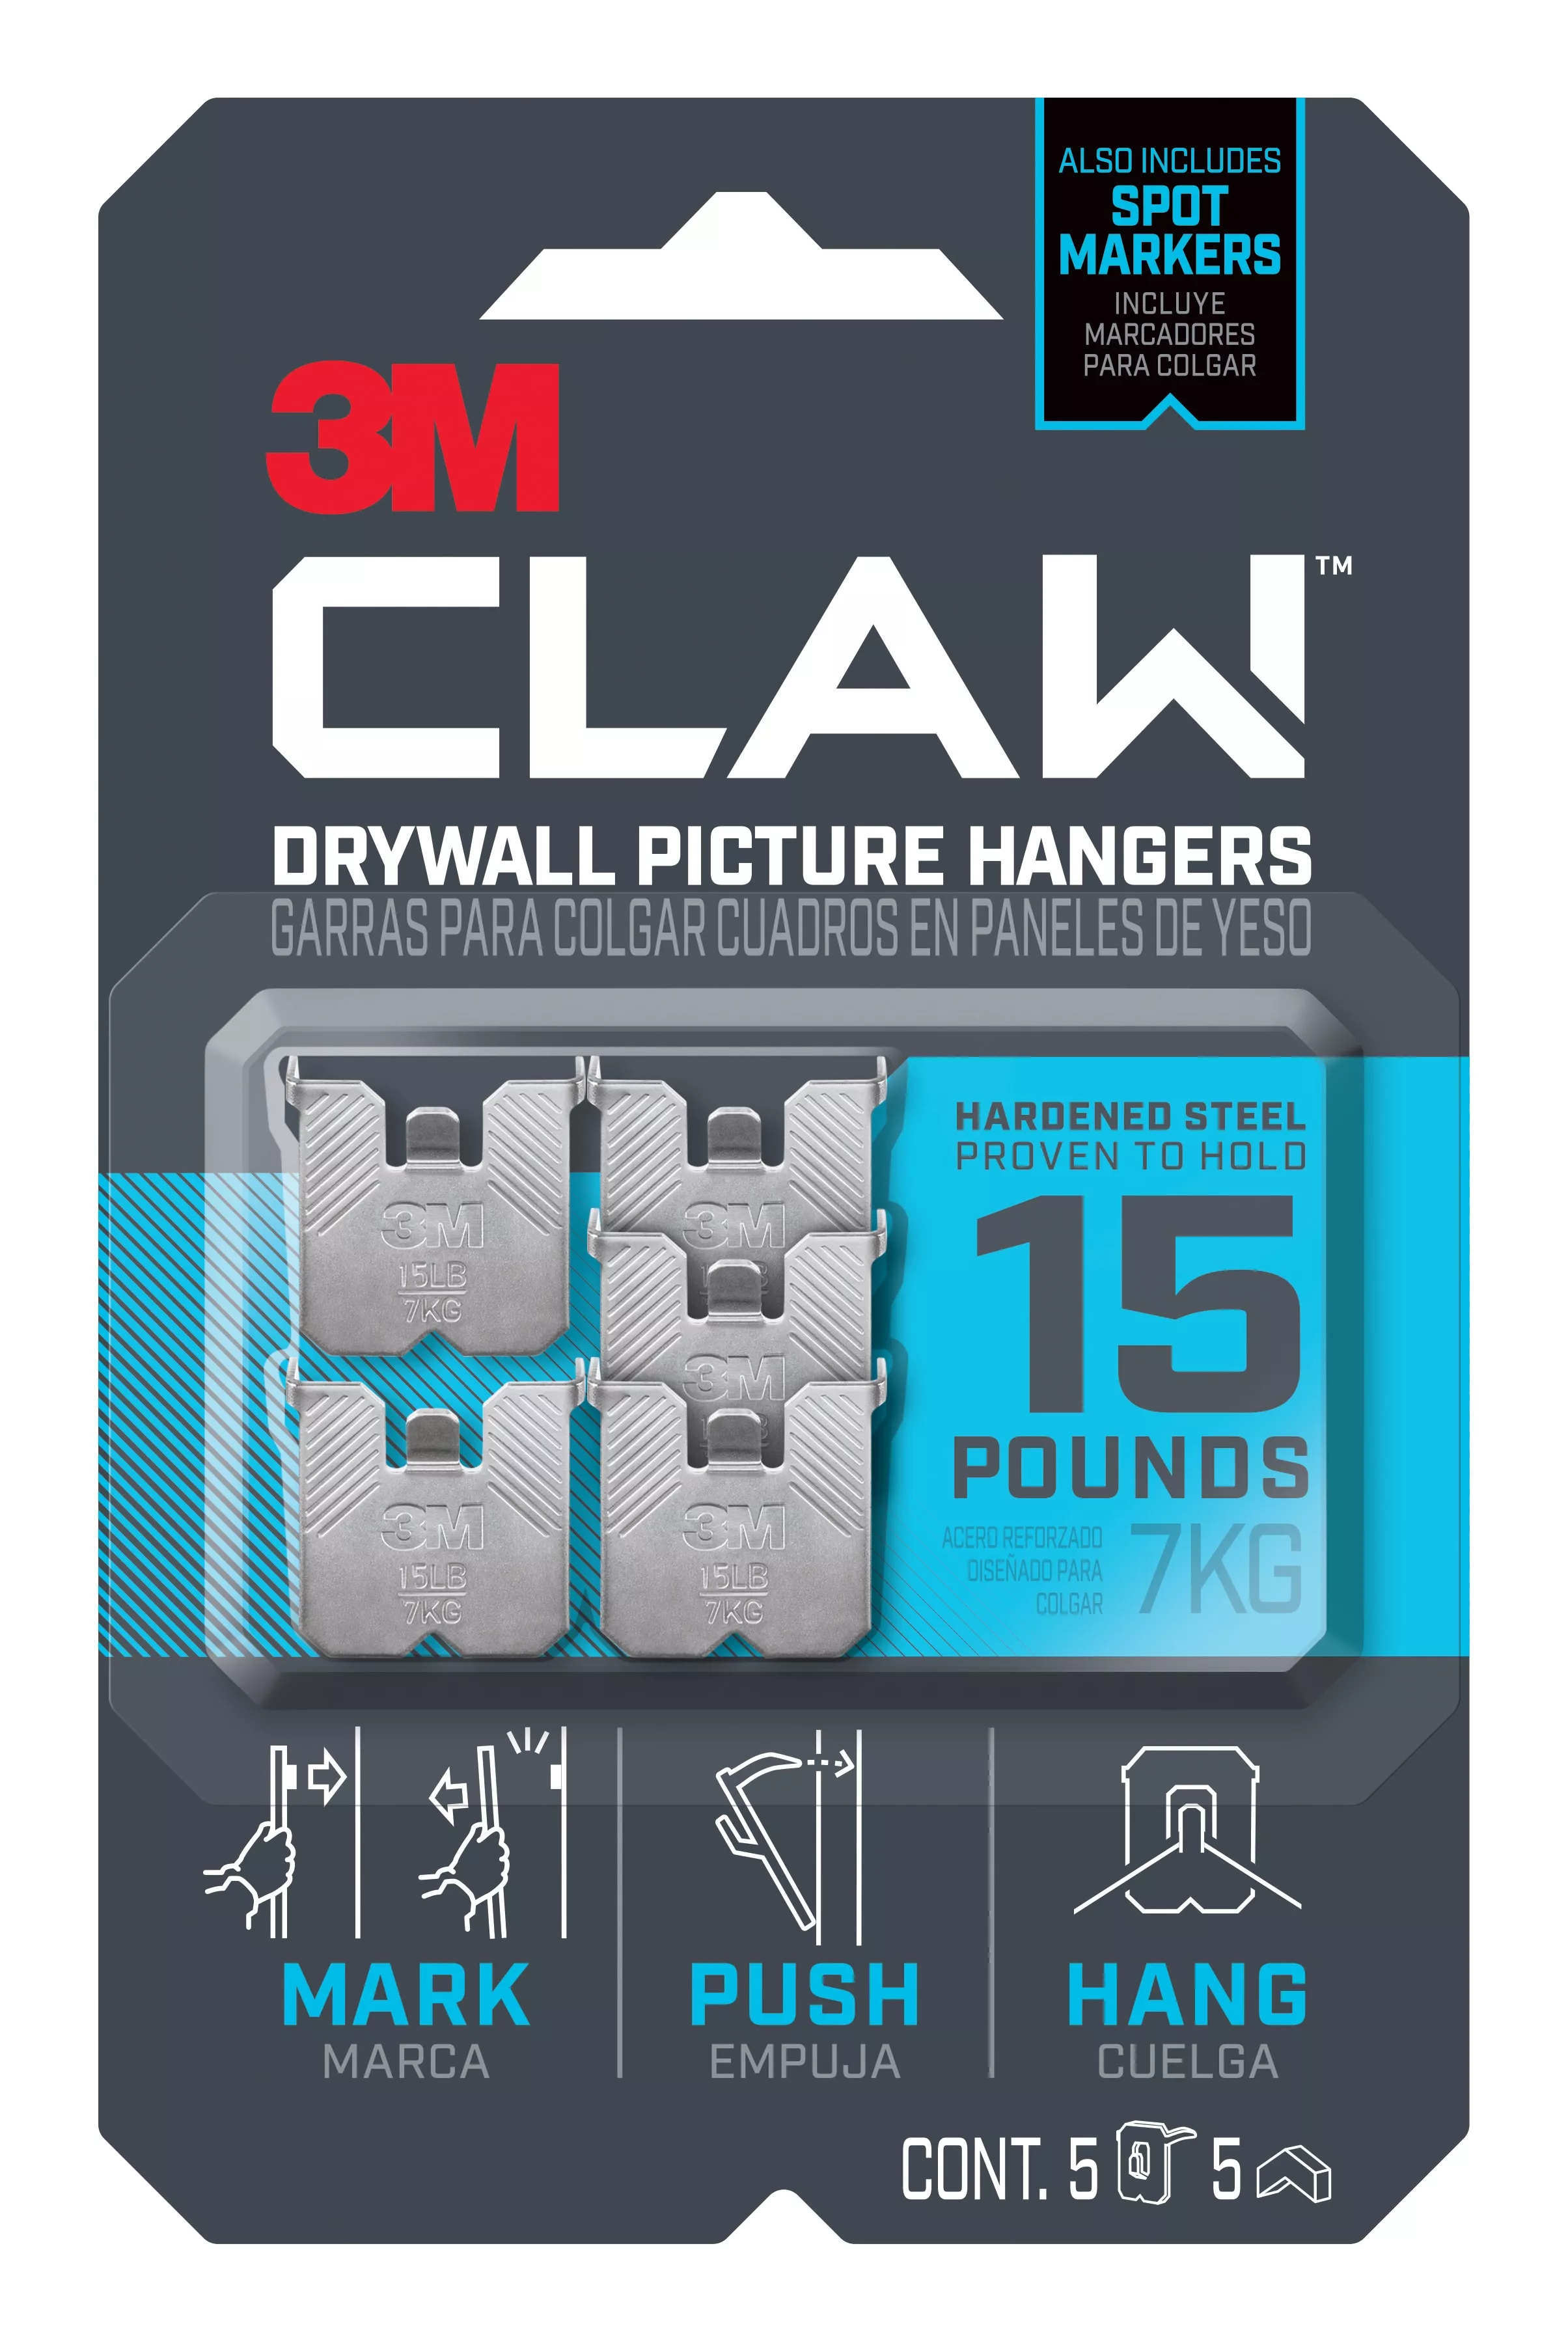 3M CLAW™ Drywall Picture Hanger 15 lb with Temporary Spot Marker 3PH15M-5EF, 5 hangers, 5 markers